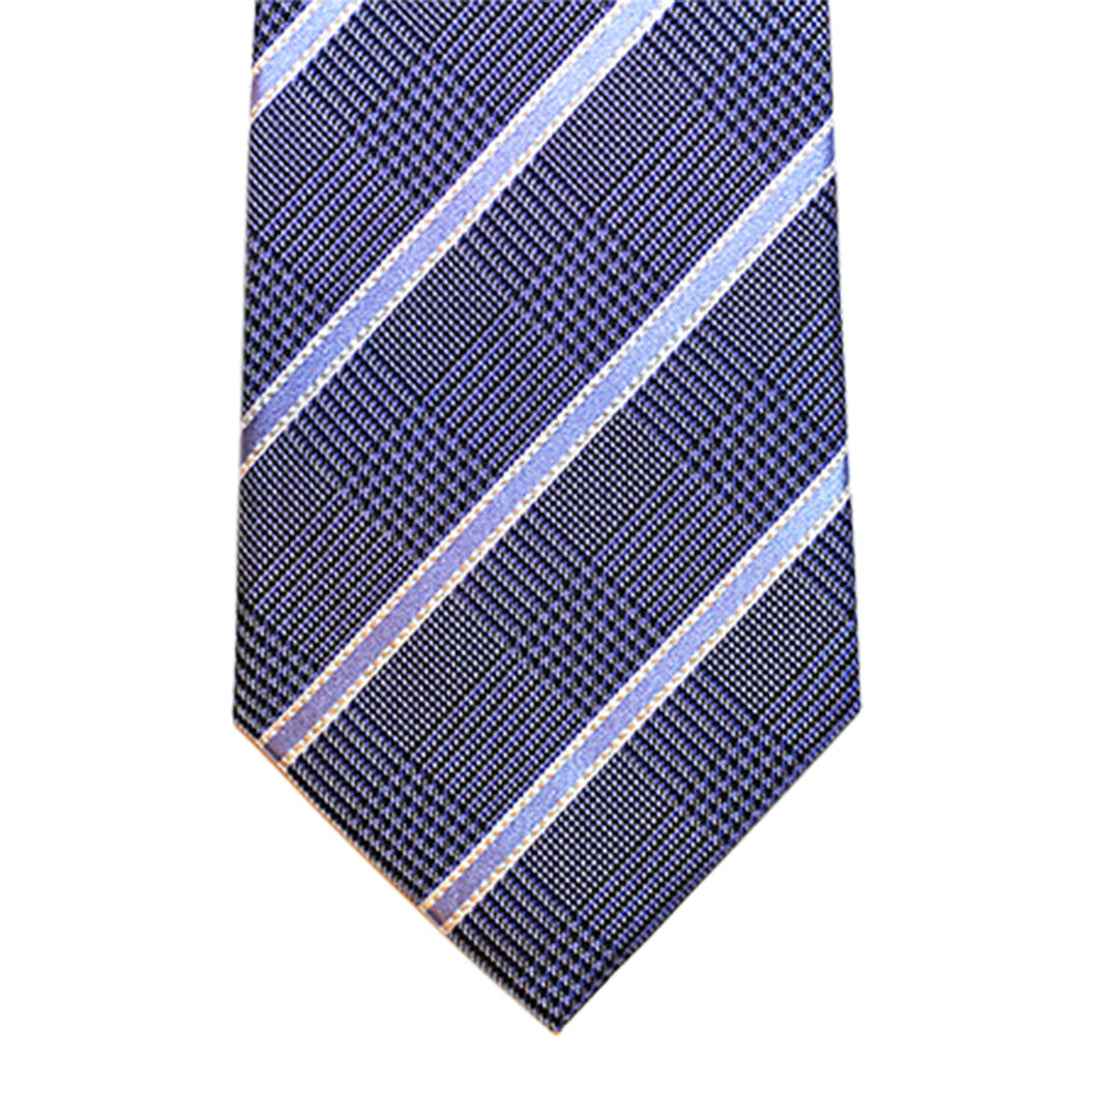 Blue & Light Blue Striped Silk Tie with houndstooth background